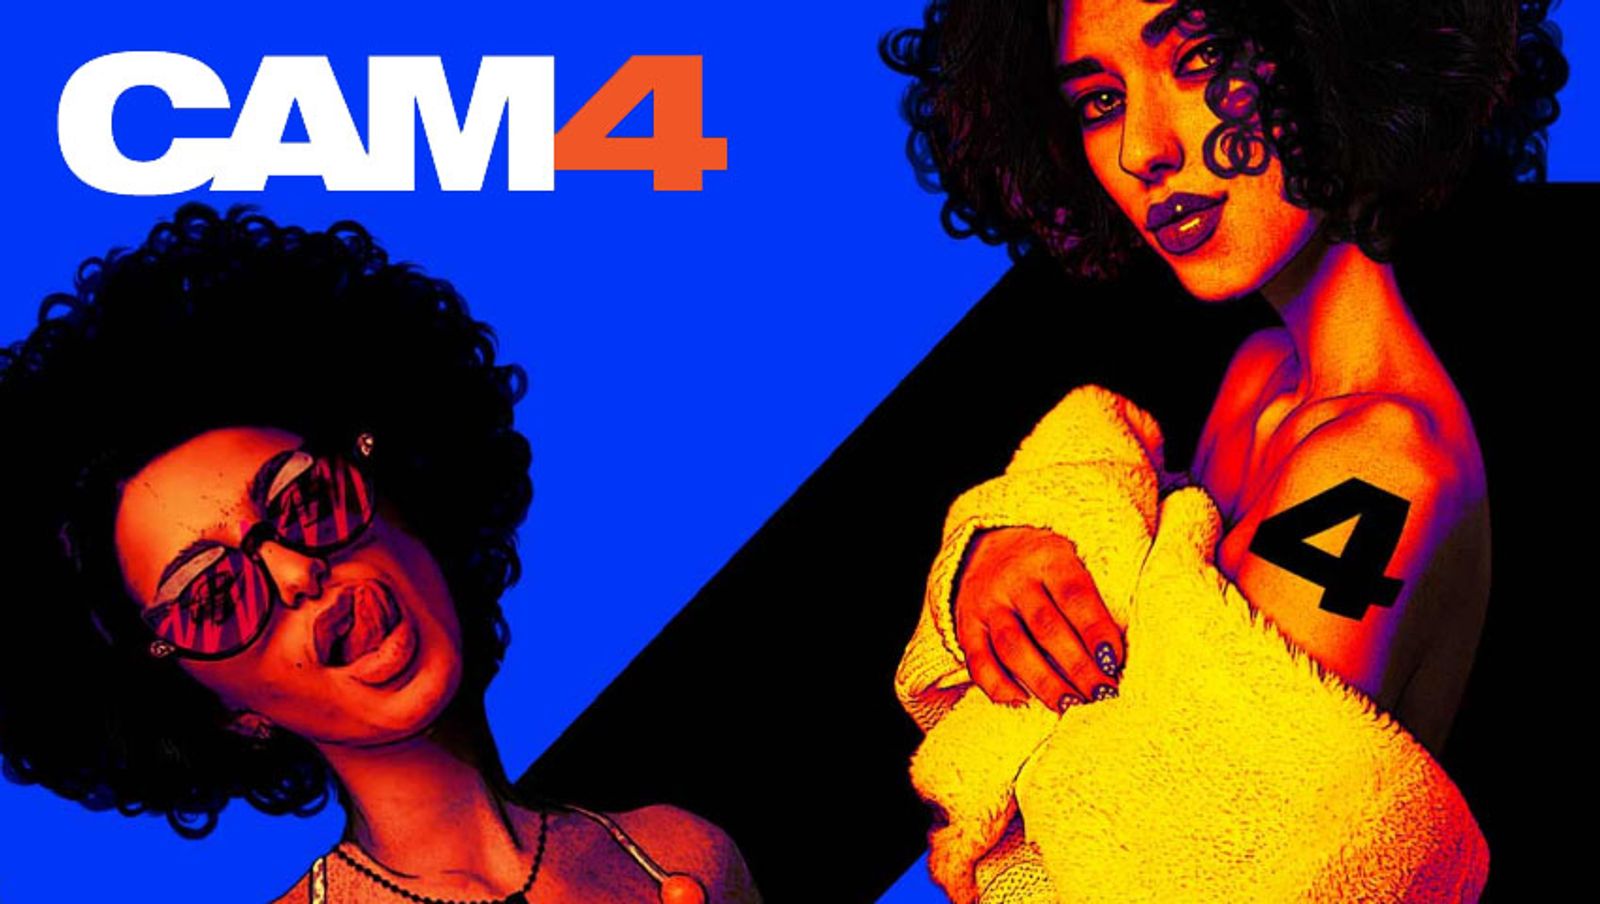 CAM4 Responds to Allegations of Security Breach